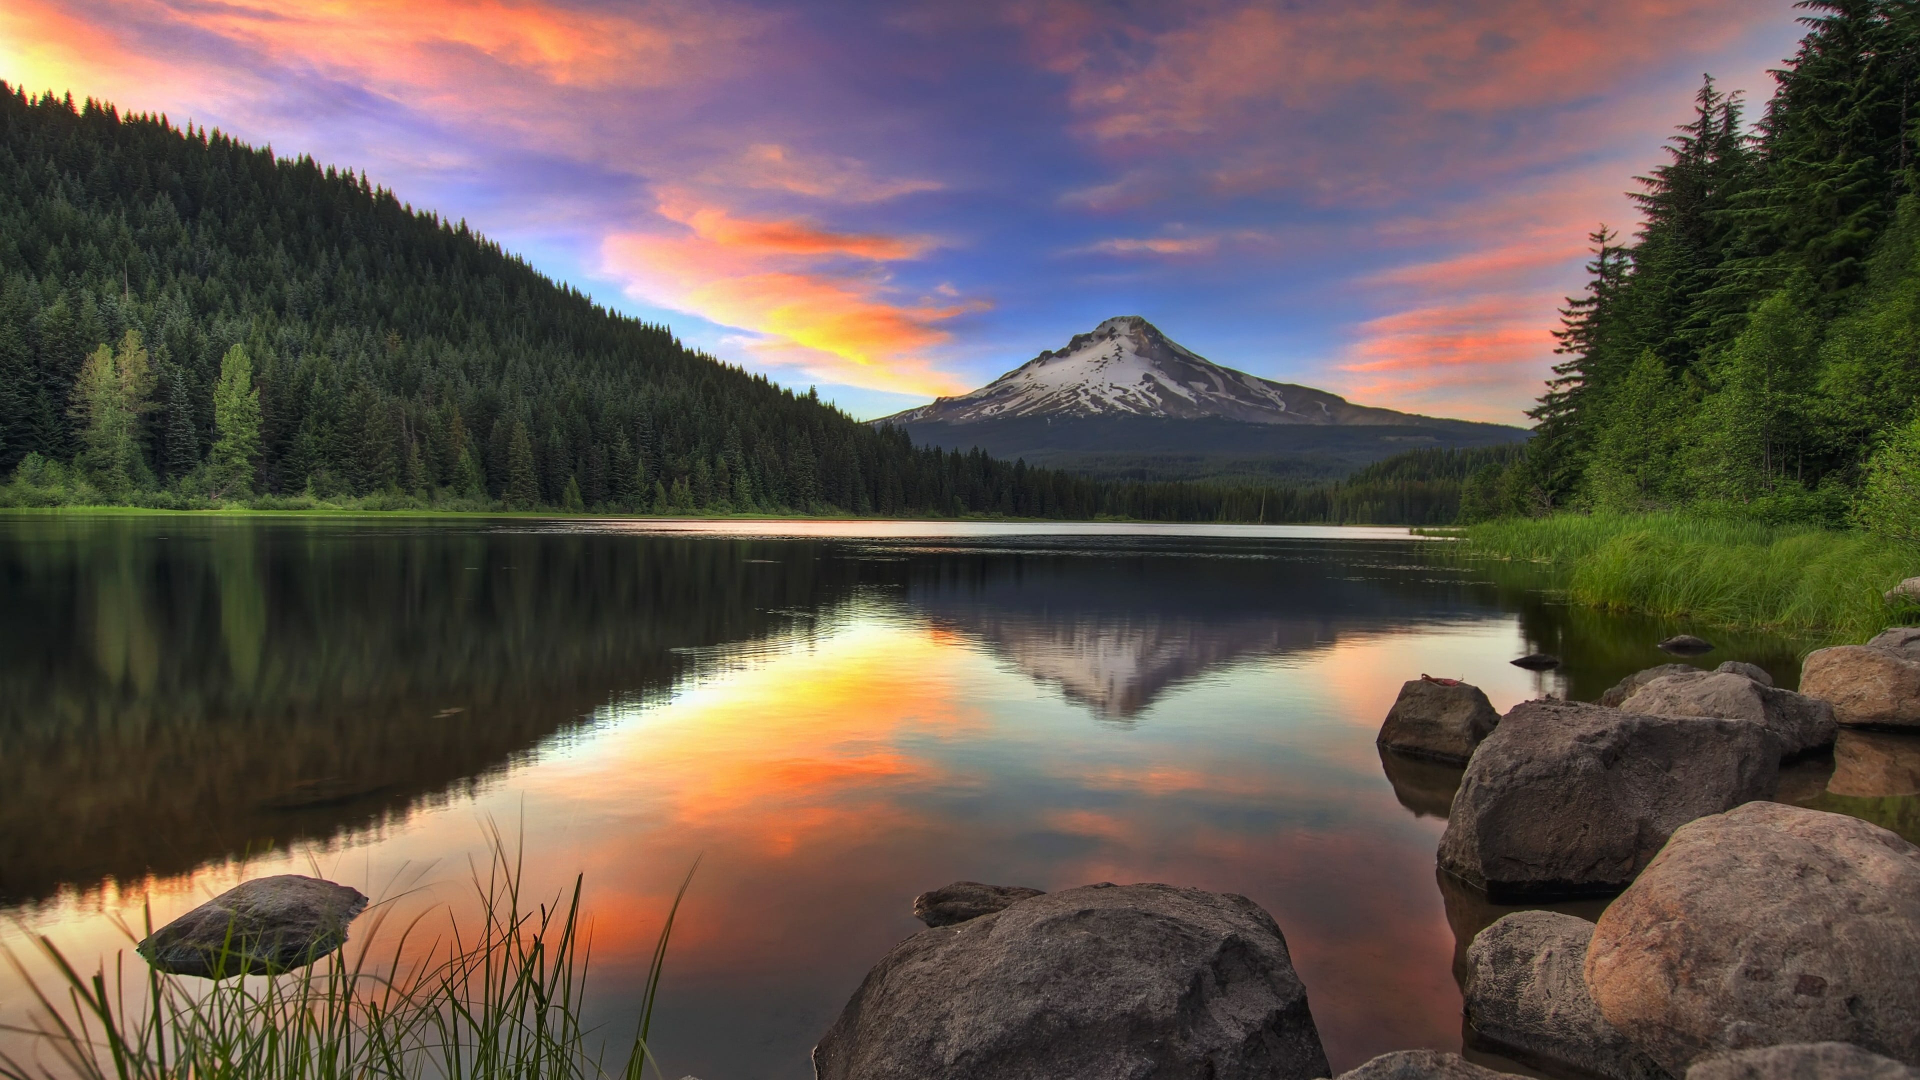 General 1920x1080 Mount Hood trees rocks water nature mountains clouds reflection sky